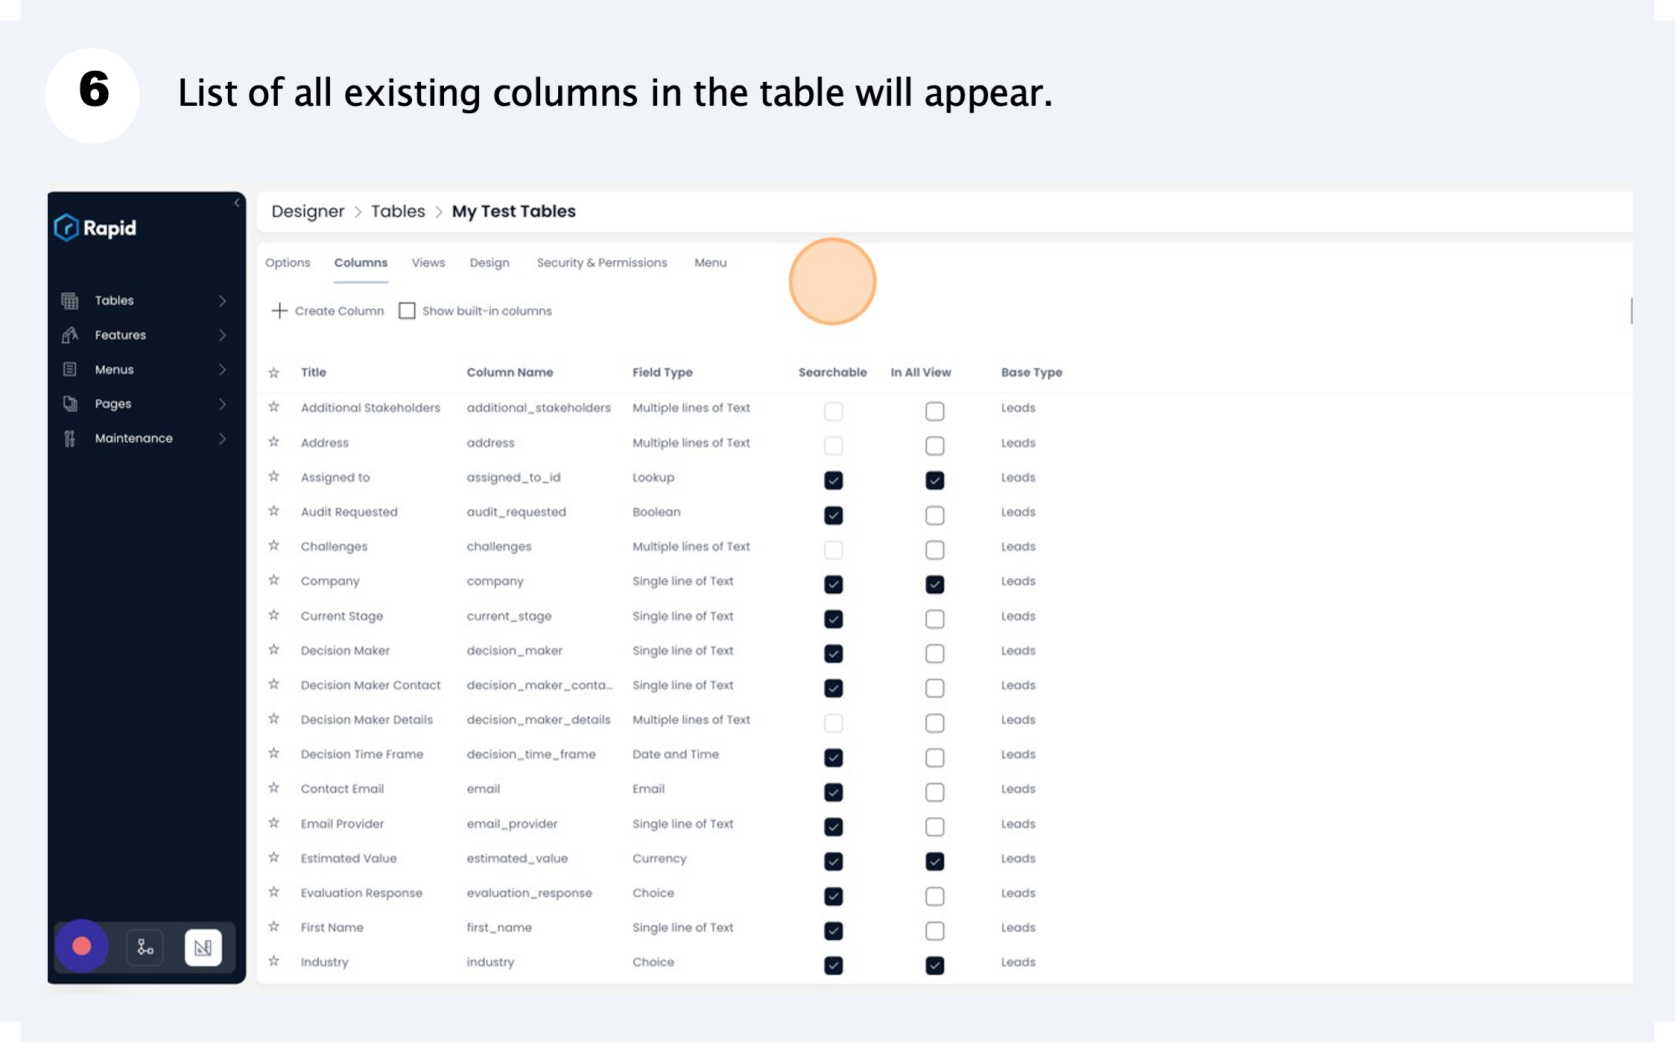 List of existing columns will appear